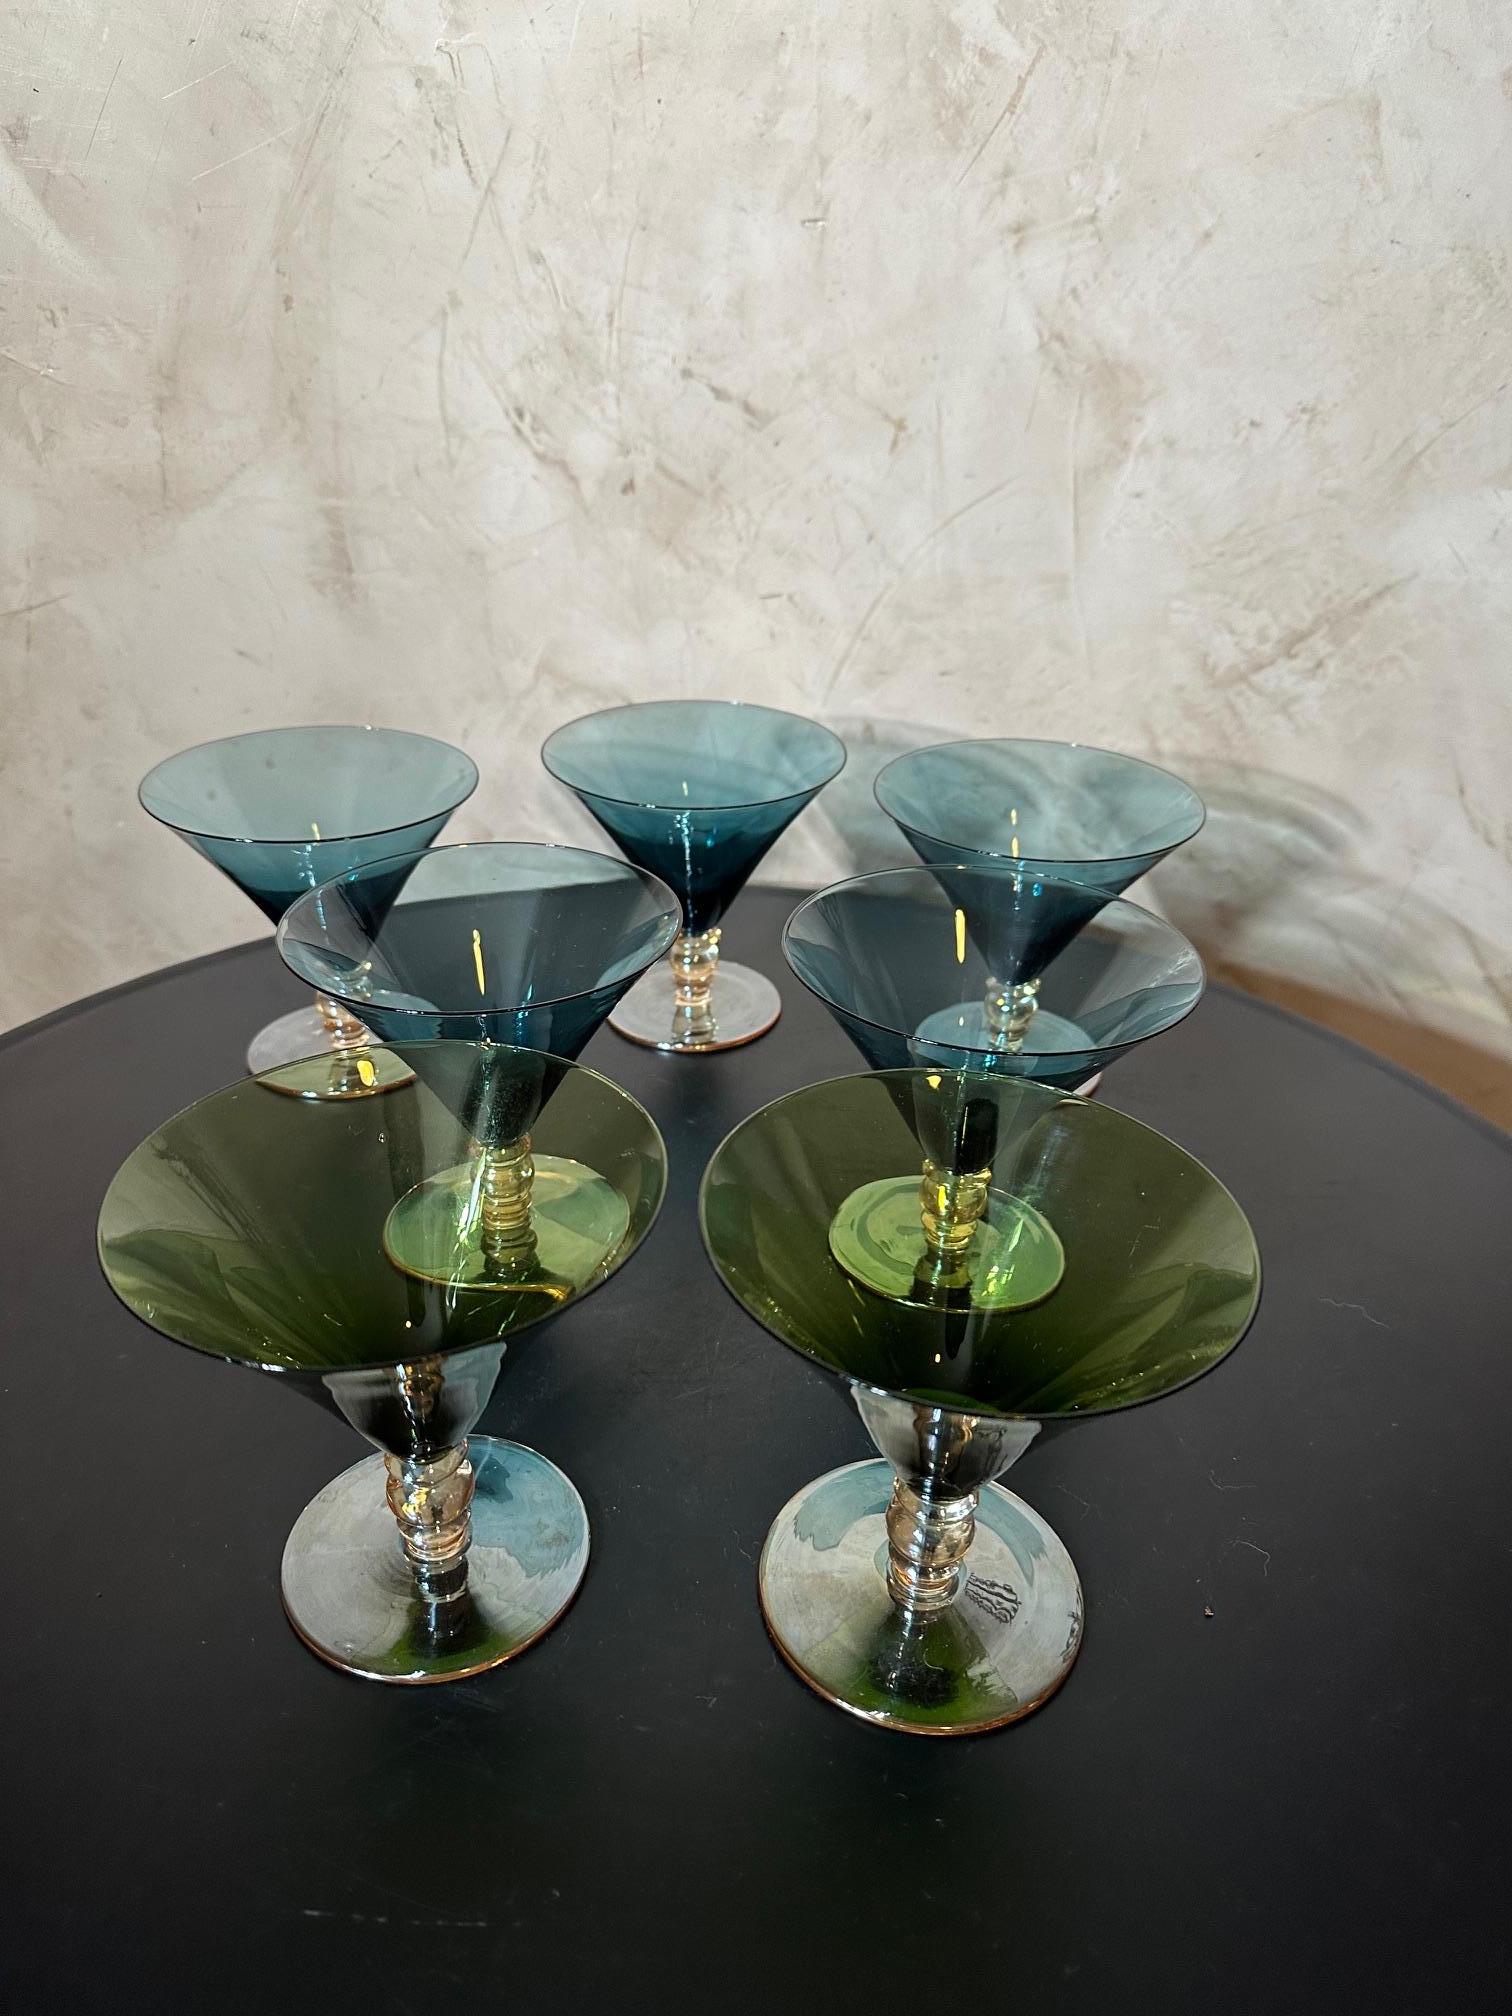 Set of seven colorful cocktail glasses from the 70s. 
Five blue and two green glasses.
Very good quality and good condition.